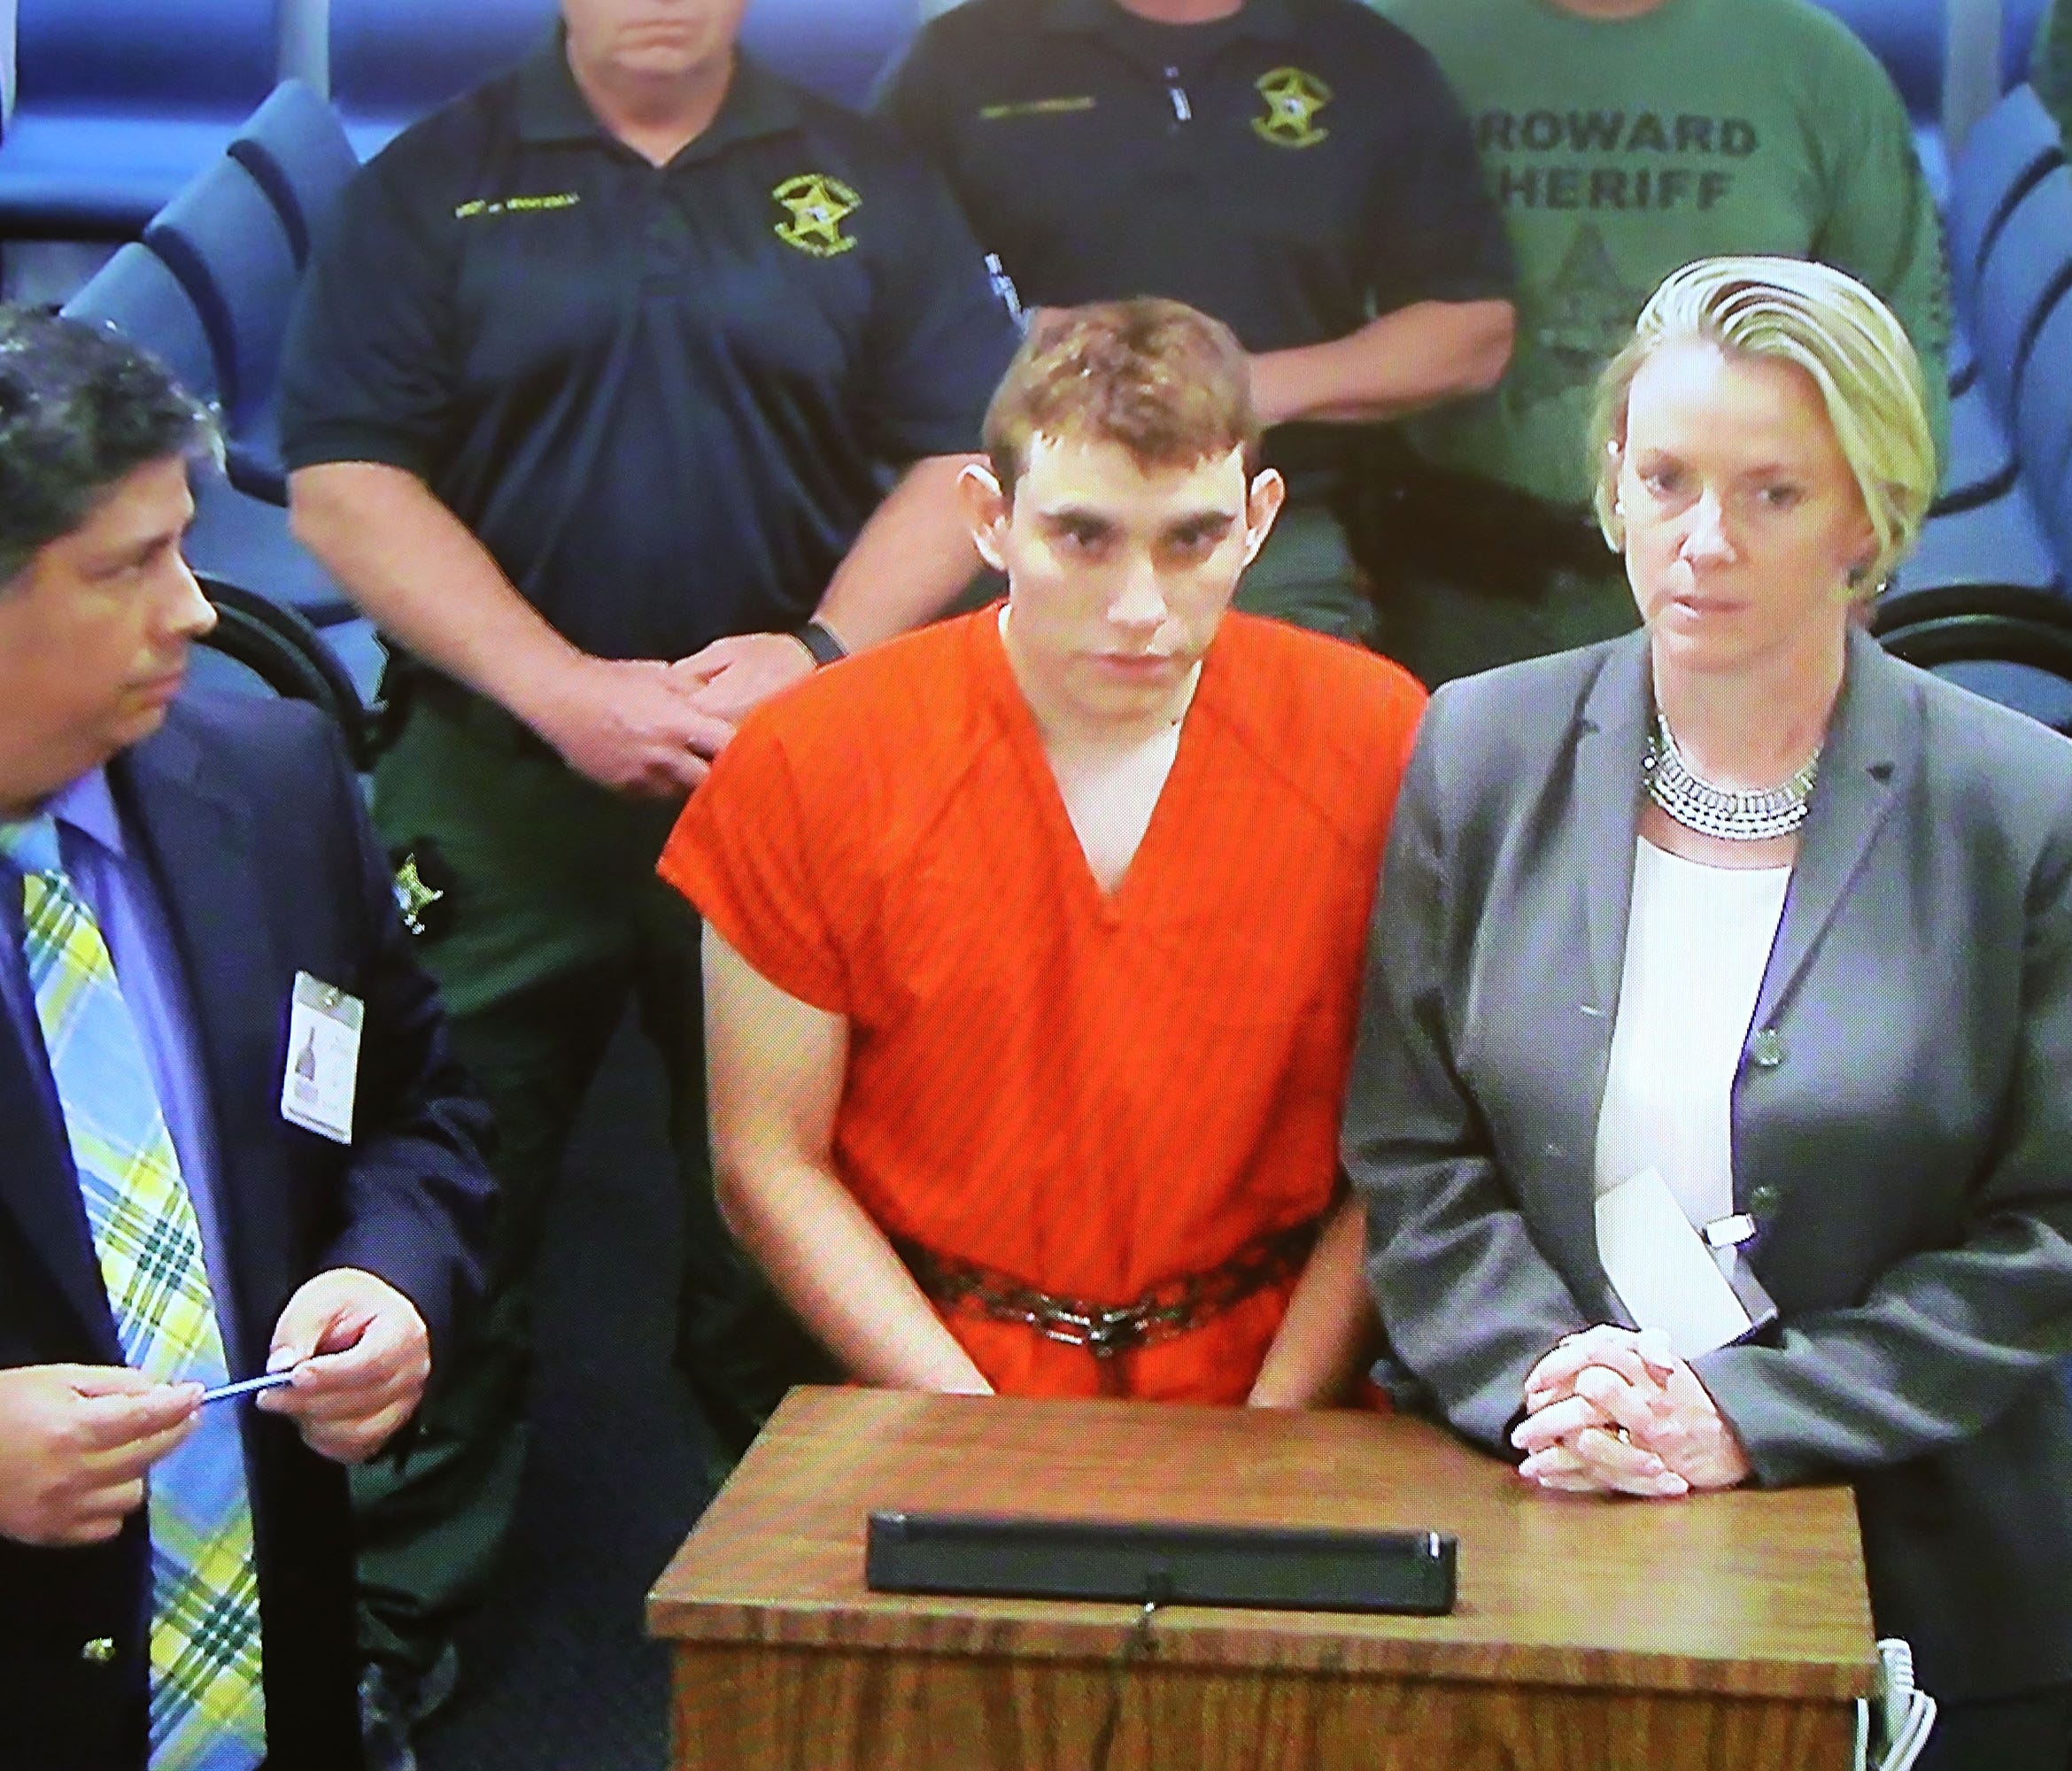 Nikolas Cruz, 19, a former student at Marjory Stoneman Douglas High School in Parkland, Fla., where he allegedly killed 17 people, is seen on a closed circuit television screen during a bond  hearing in front of Broward Judge Kim Mollica at the Browa